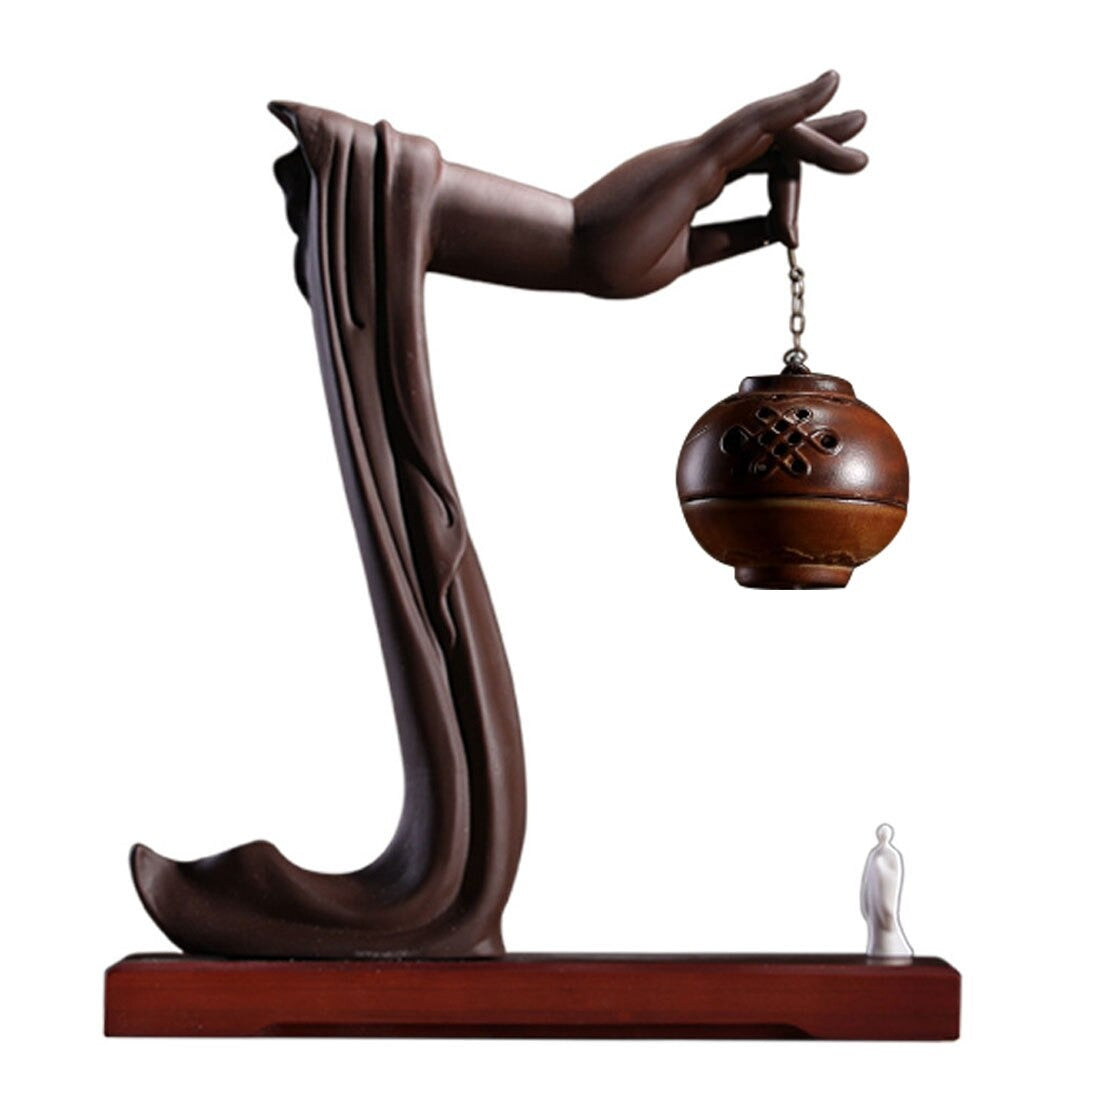 A backflow incense holder on a reddish brown base and white background. A hand is holding a red ball shaped incense burner with a white figure standing underneath,